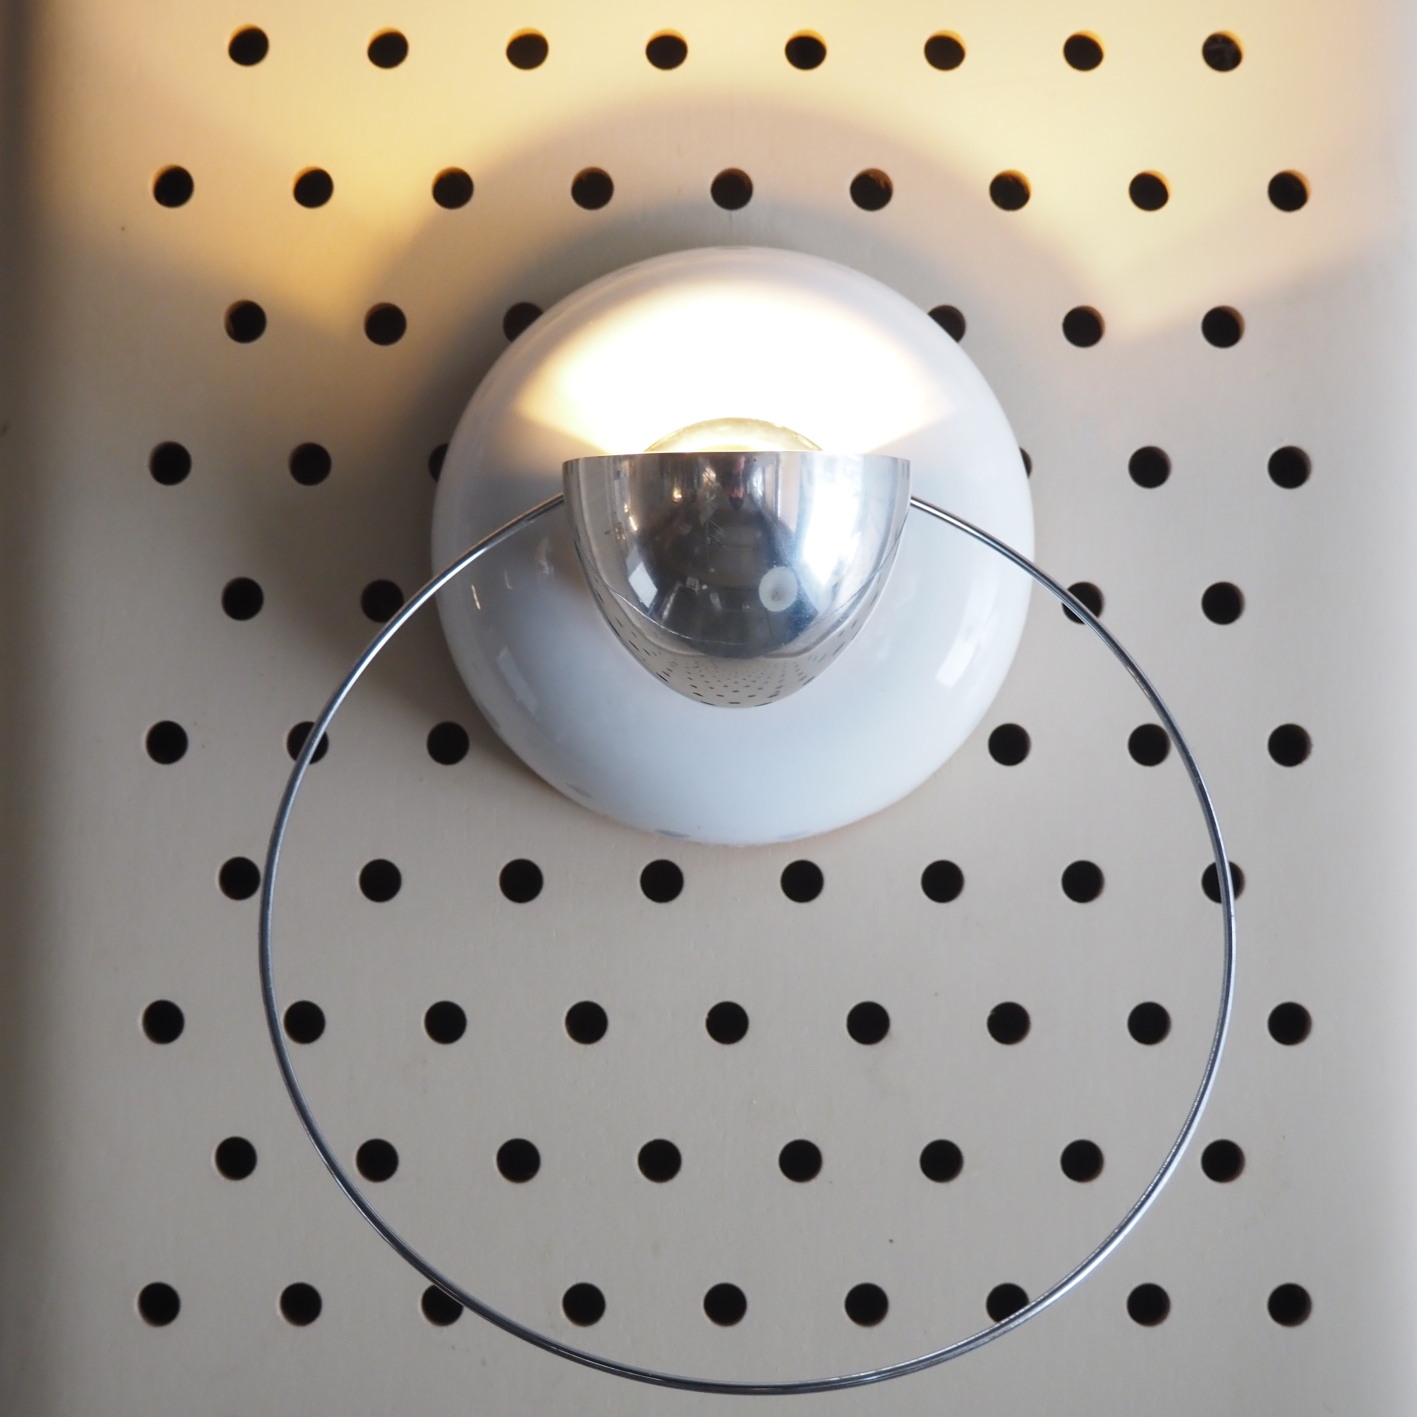 Wall light 'Bisbi' by Achille Castiglioni for Flos (ca. 1987)